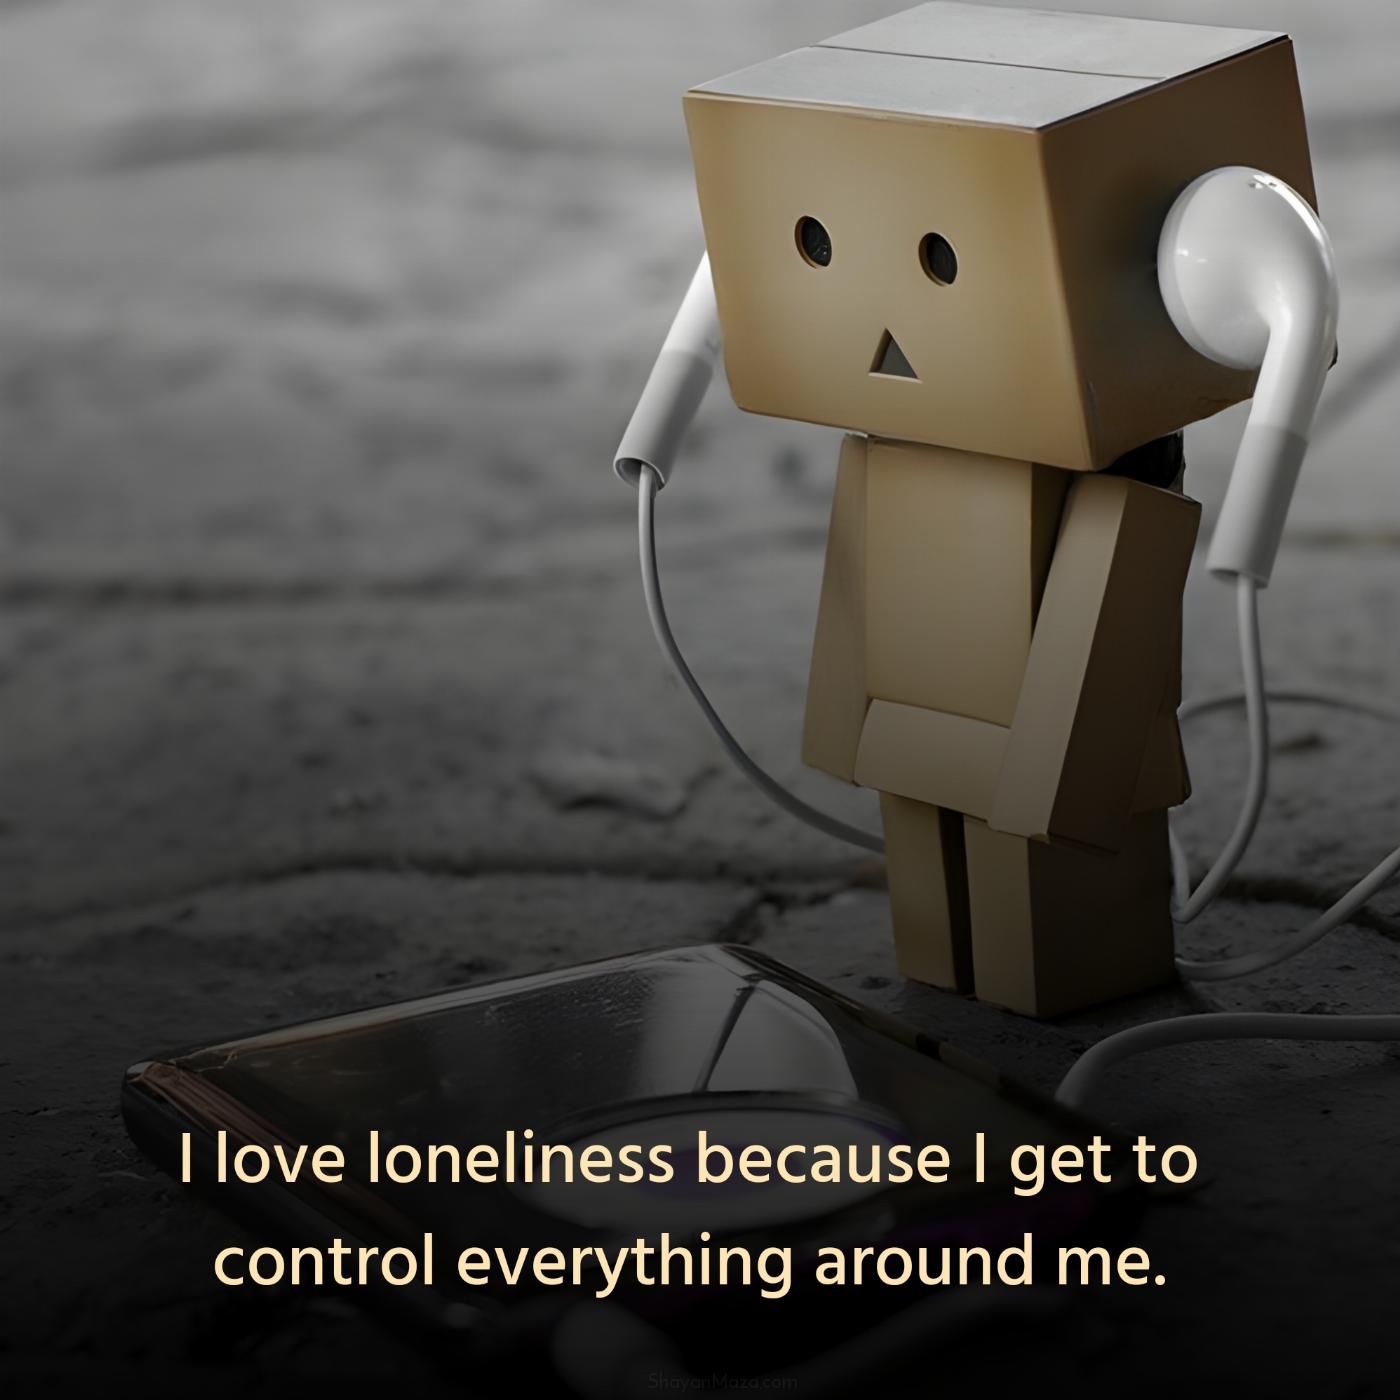 I love loneliness because I get to control everything around me